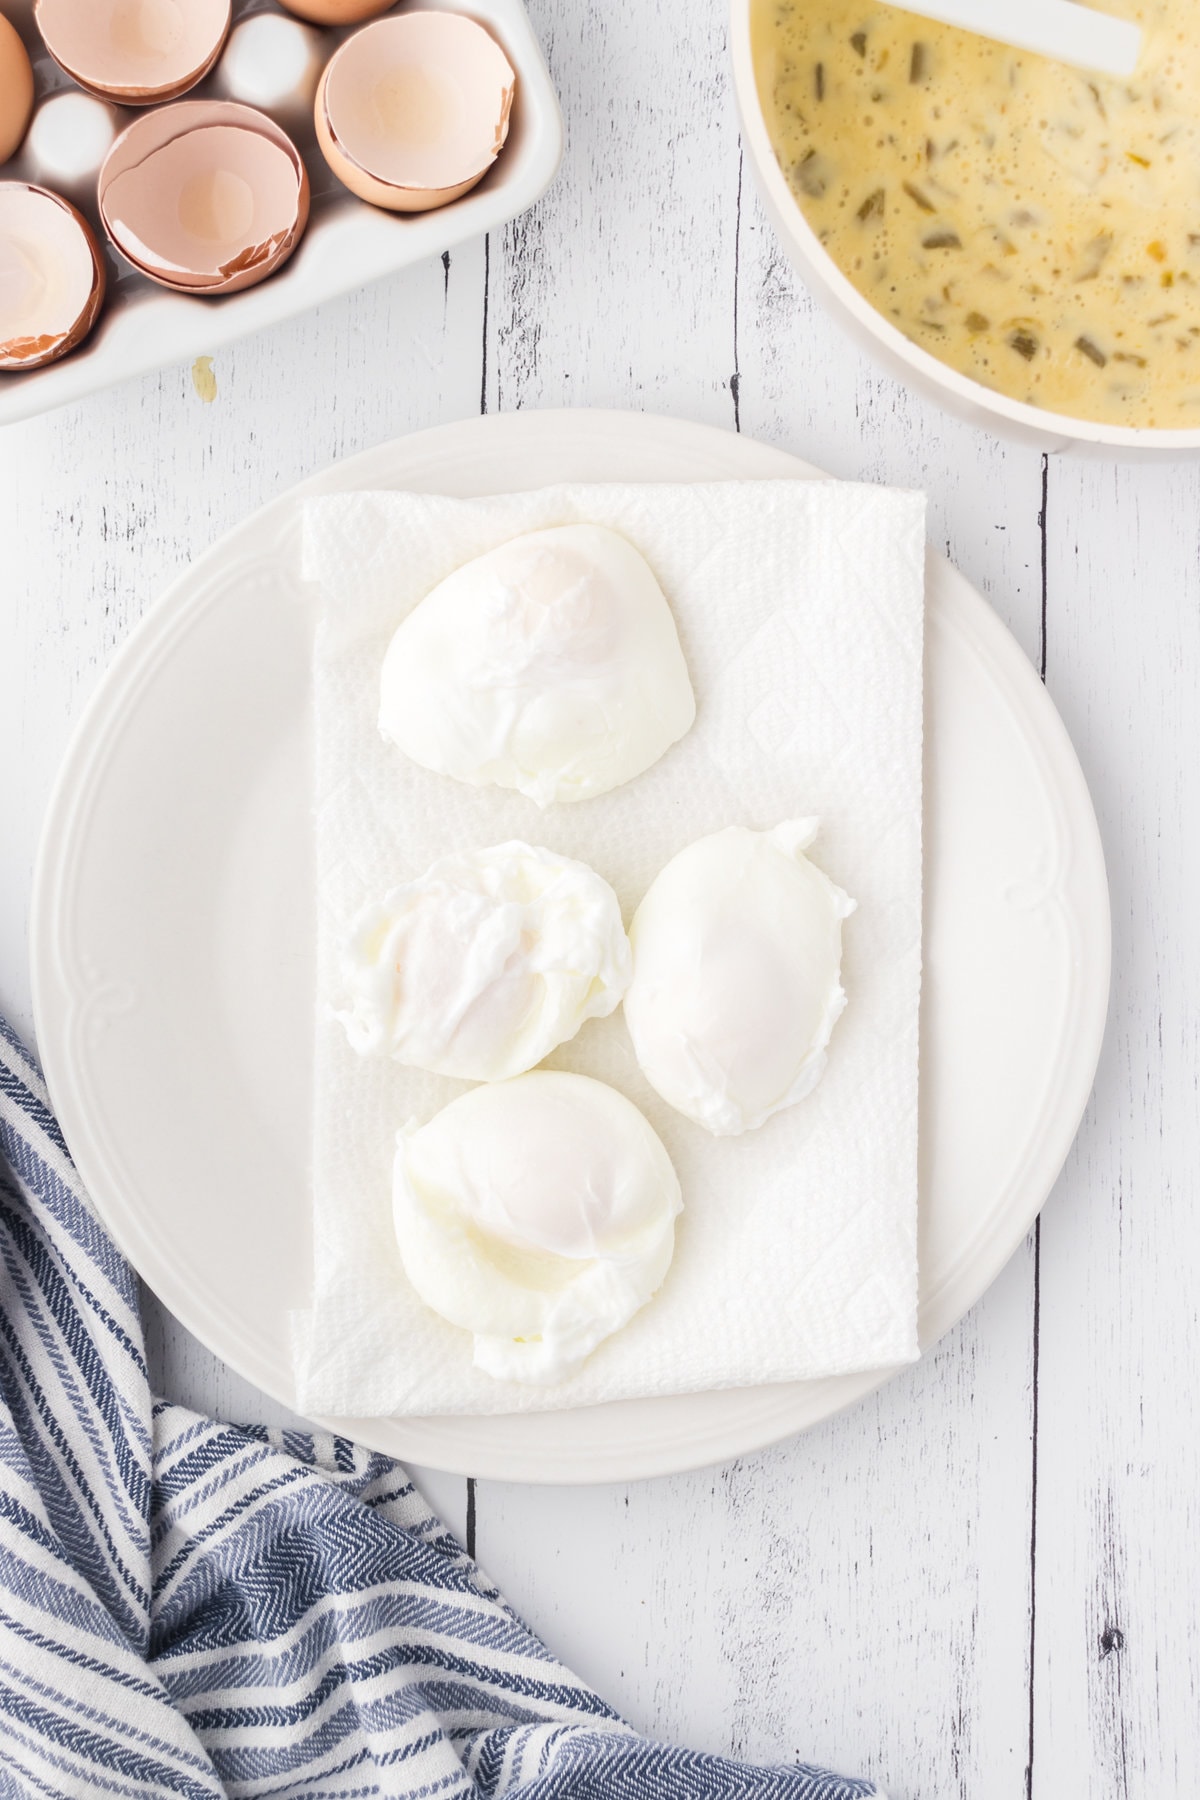 Four poached eggs being drained on a paper towel.